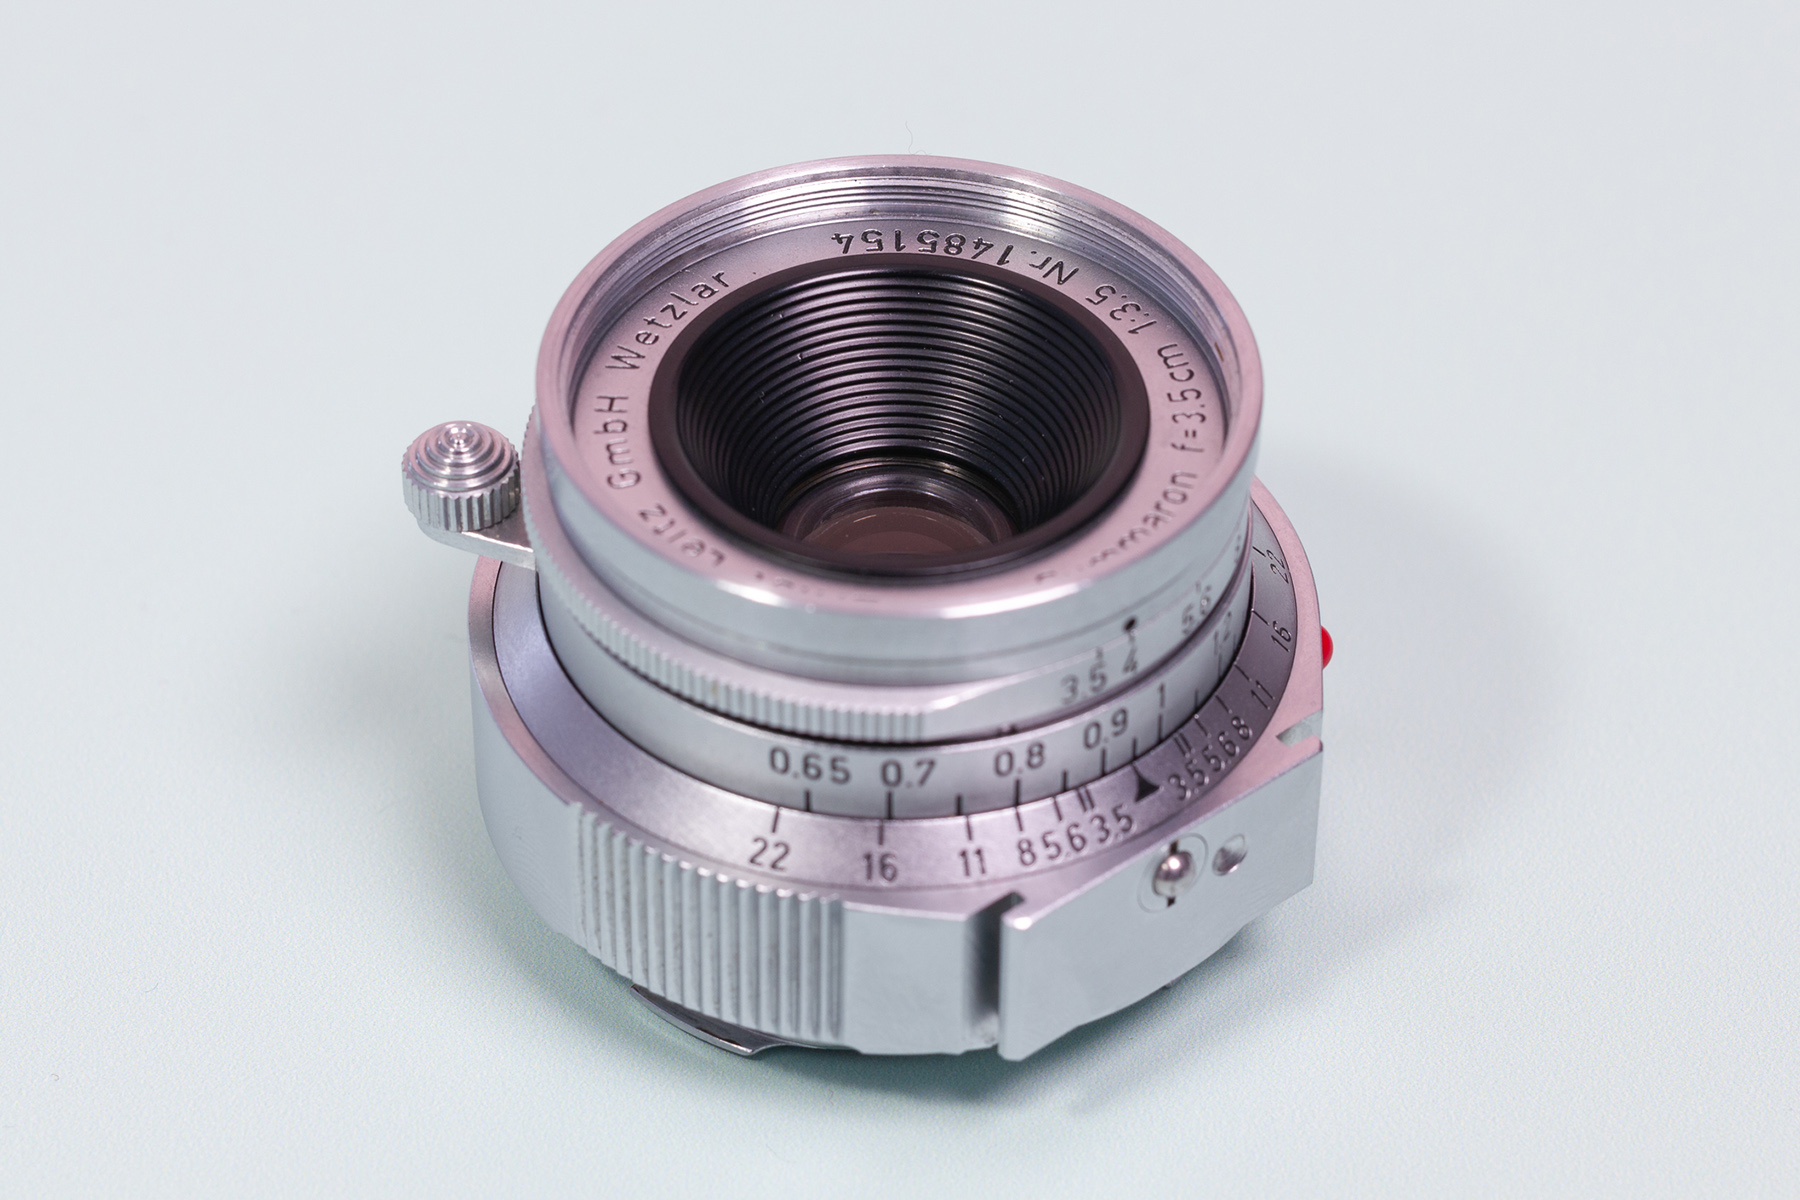 Leica Summaron 35mm f3.5 lens with goggles